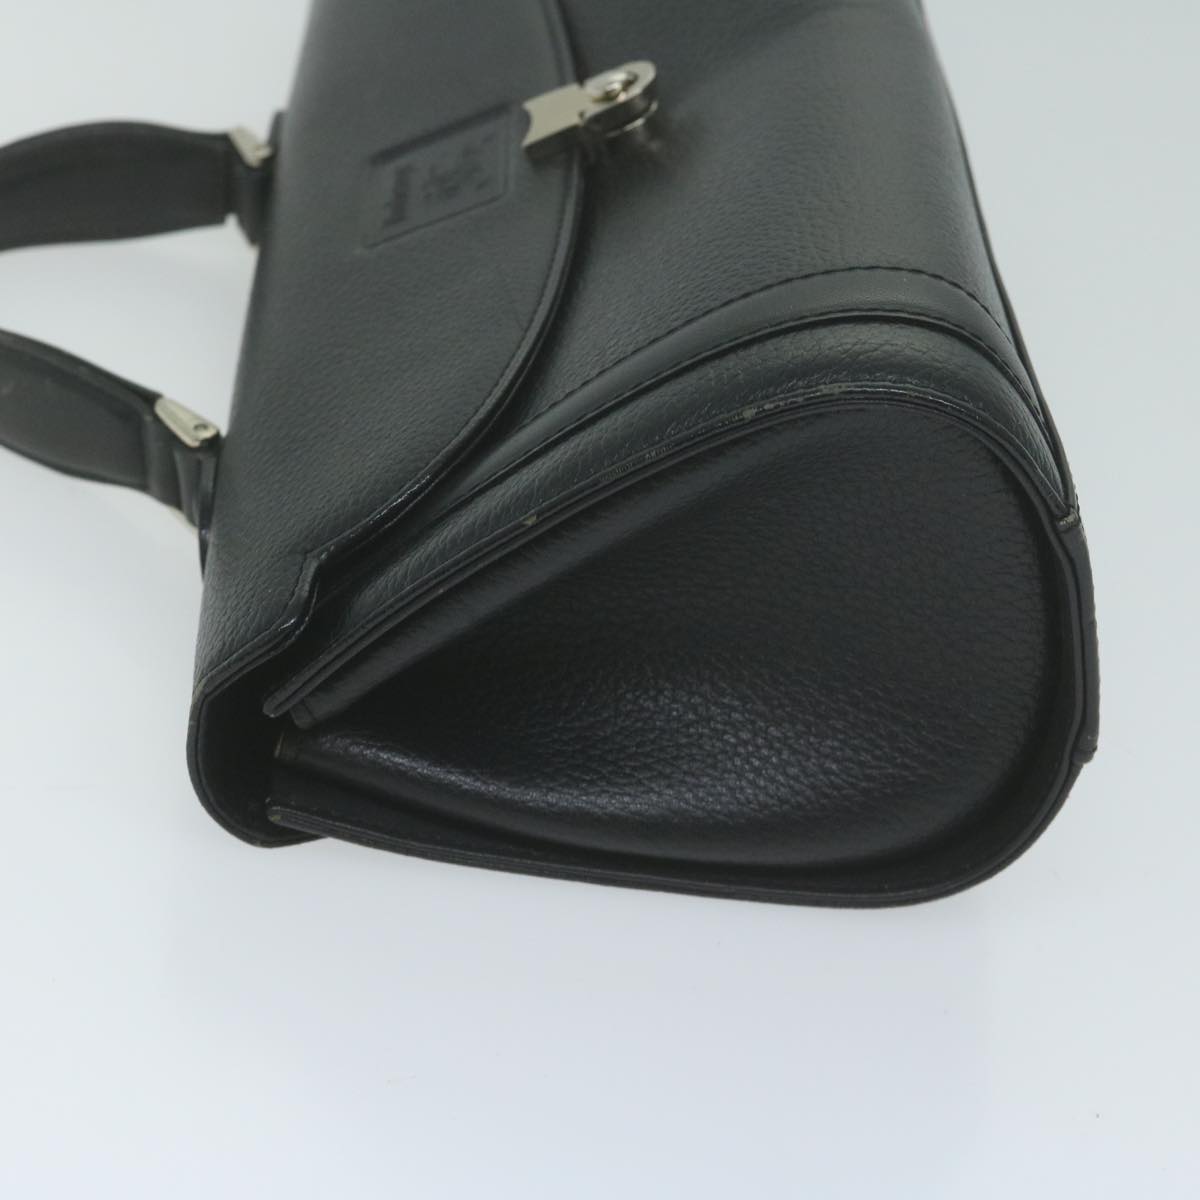 Burberrys Hand Bag Leather Black Auth 65918